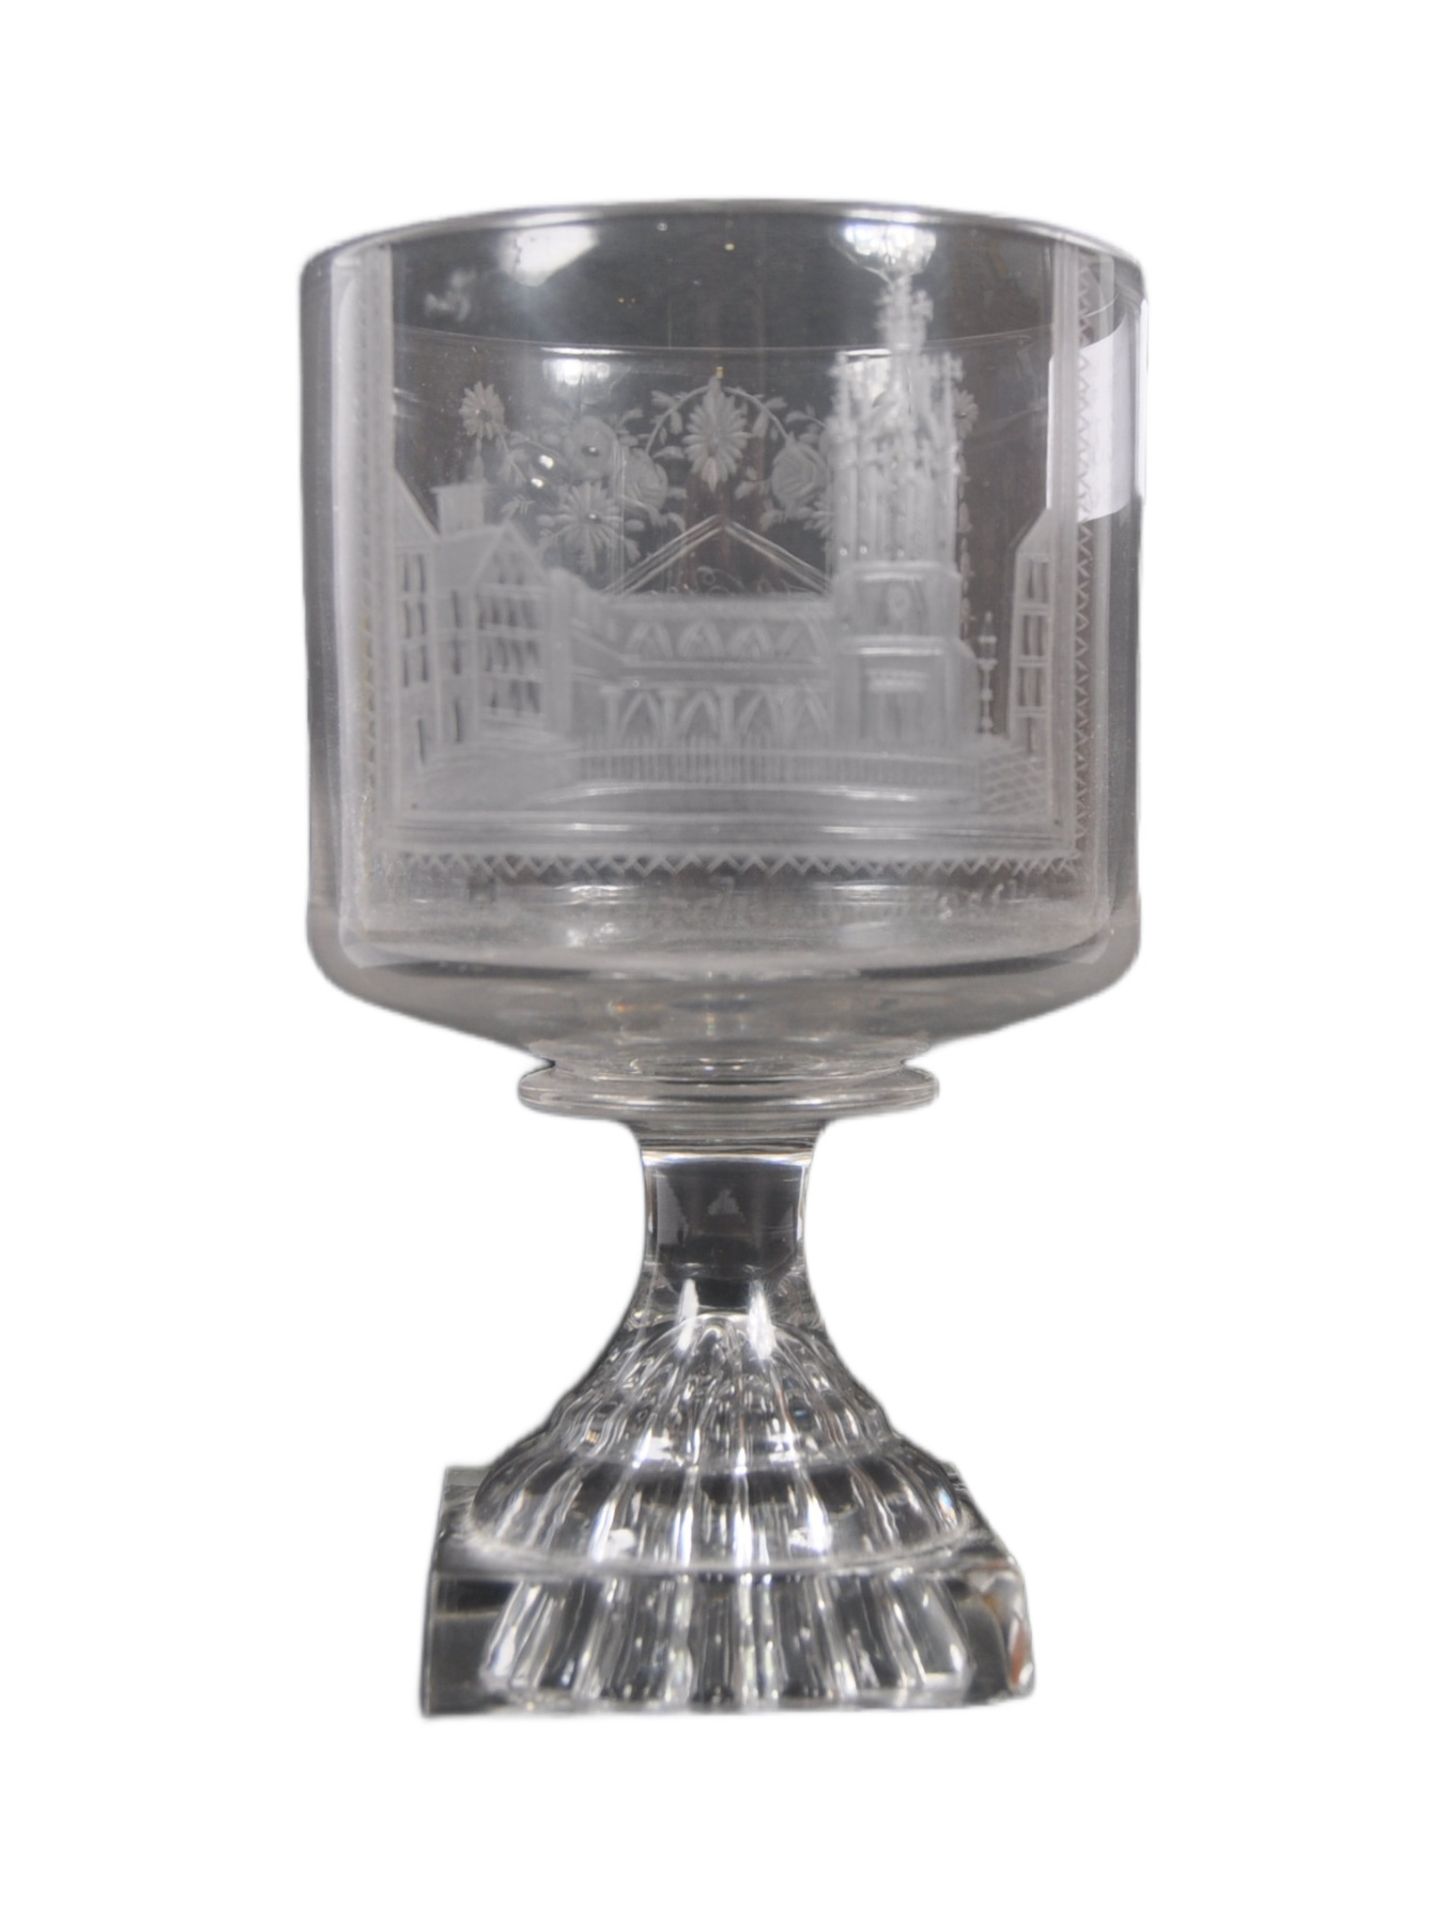 19TH CENTURY VICTORIAN NEWCASTLE CHURCH GOBLET - Image 7 of 7